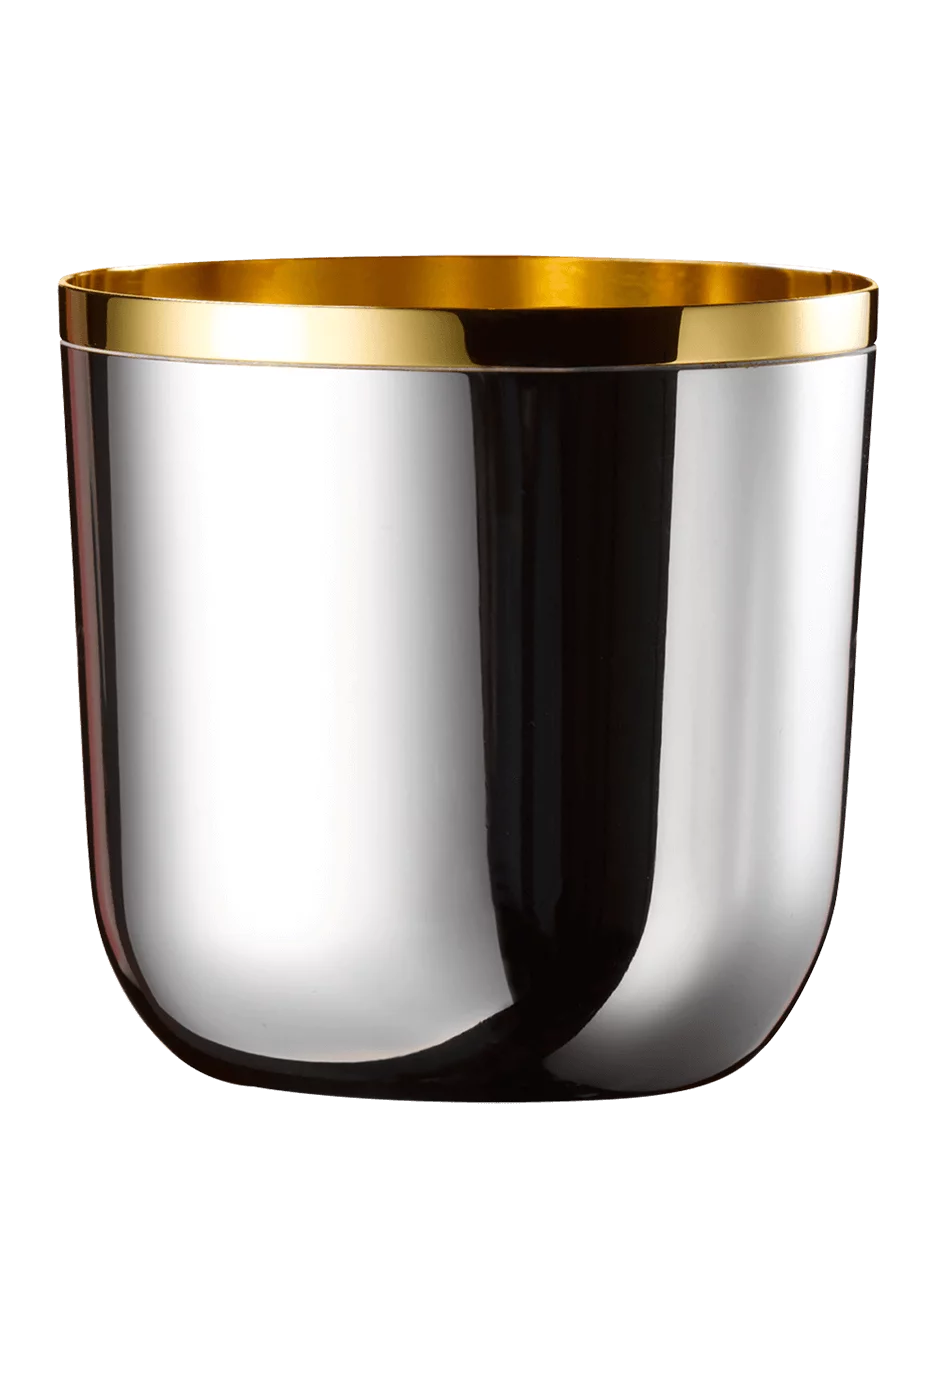 Alta Tumbler, Inside Gold (90g silverplated)